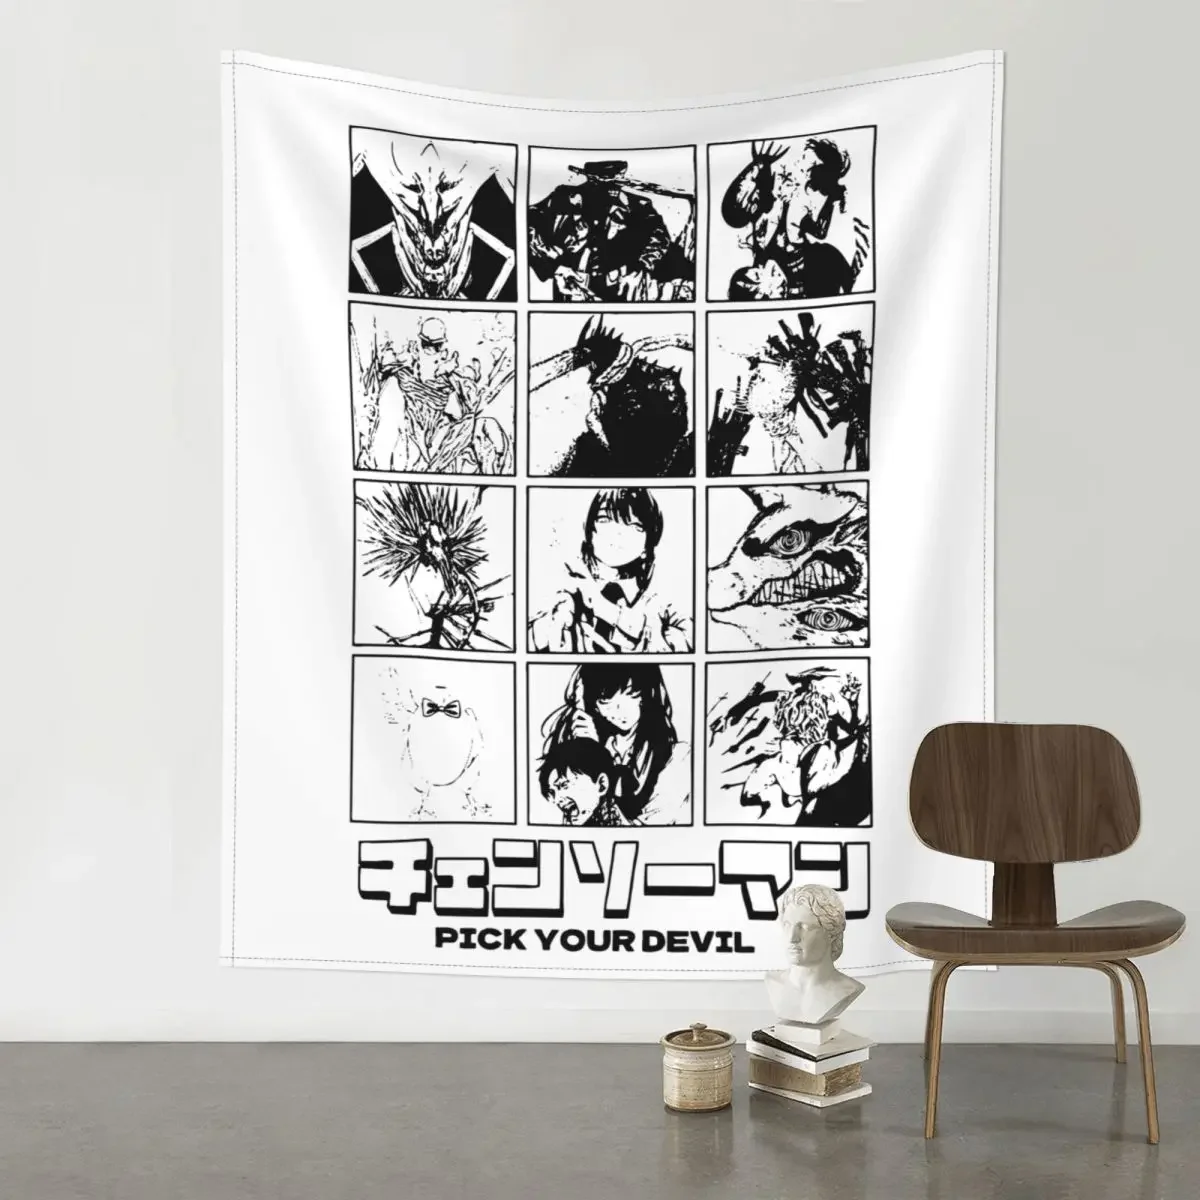 

Chainsaw Man Pick Your Devil Tapestry Wall Hanging Hippie Polyester Wall Tapestry Manga Anime Art Blanket Wall Decor Wall Cloth